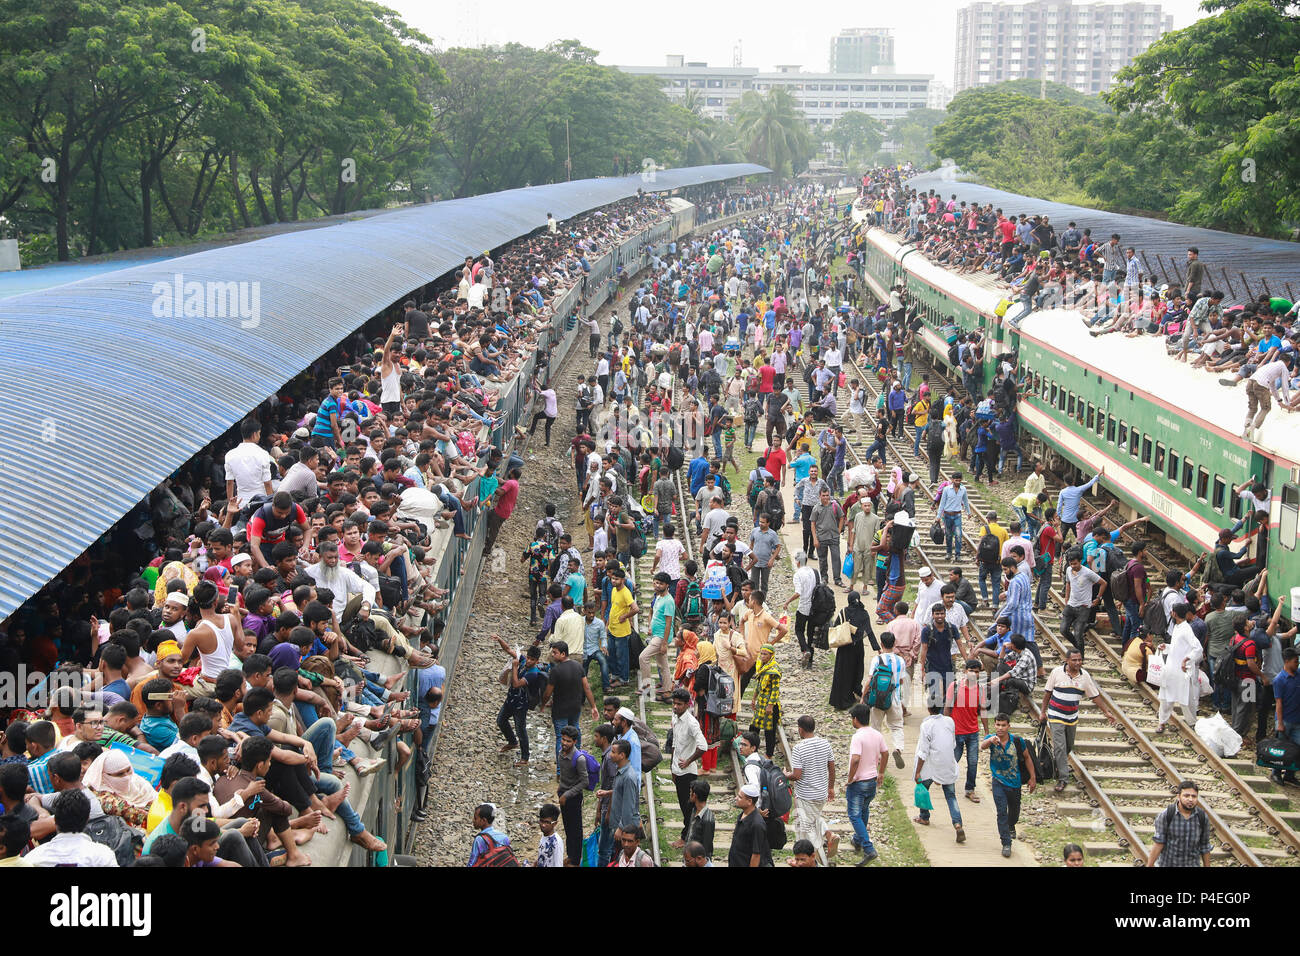 June 14, 2018- Dhaka, Bangladesh:  Muslims sit on top of trains as they travel to their hometowns ahead of the Muslim holiday of Eid al-Fitr. (Suvra K Stock Photo